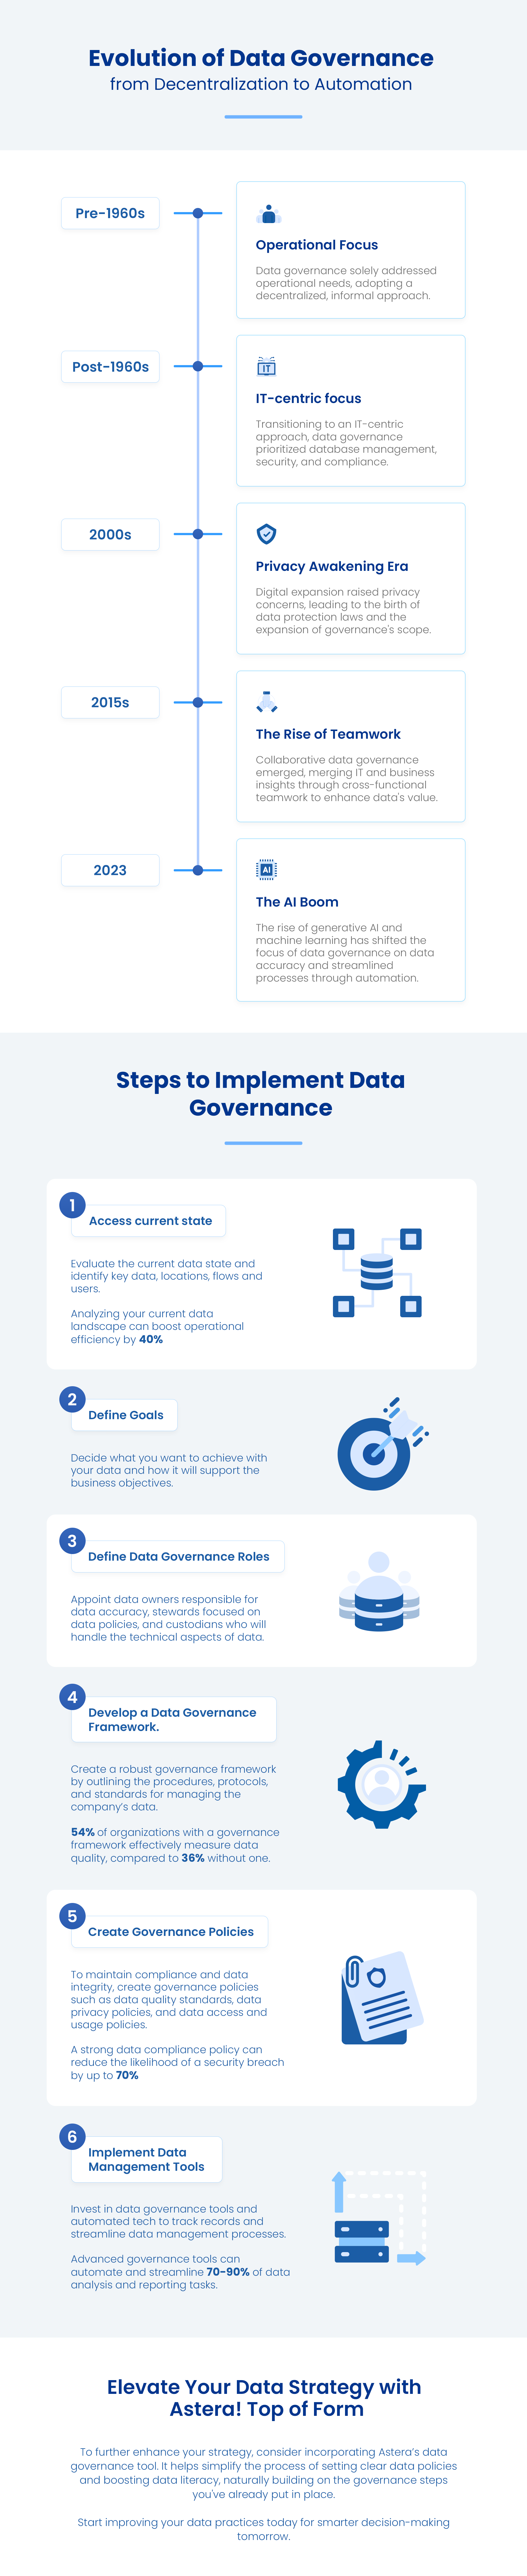 steps to implement data governance.